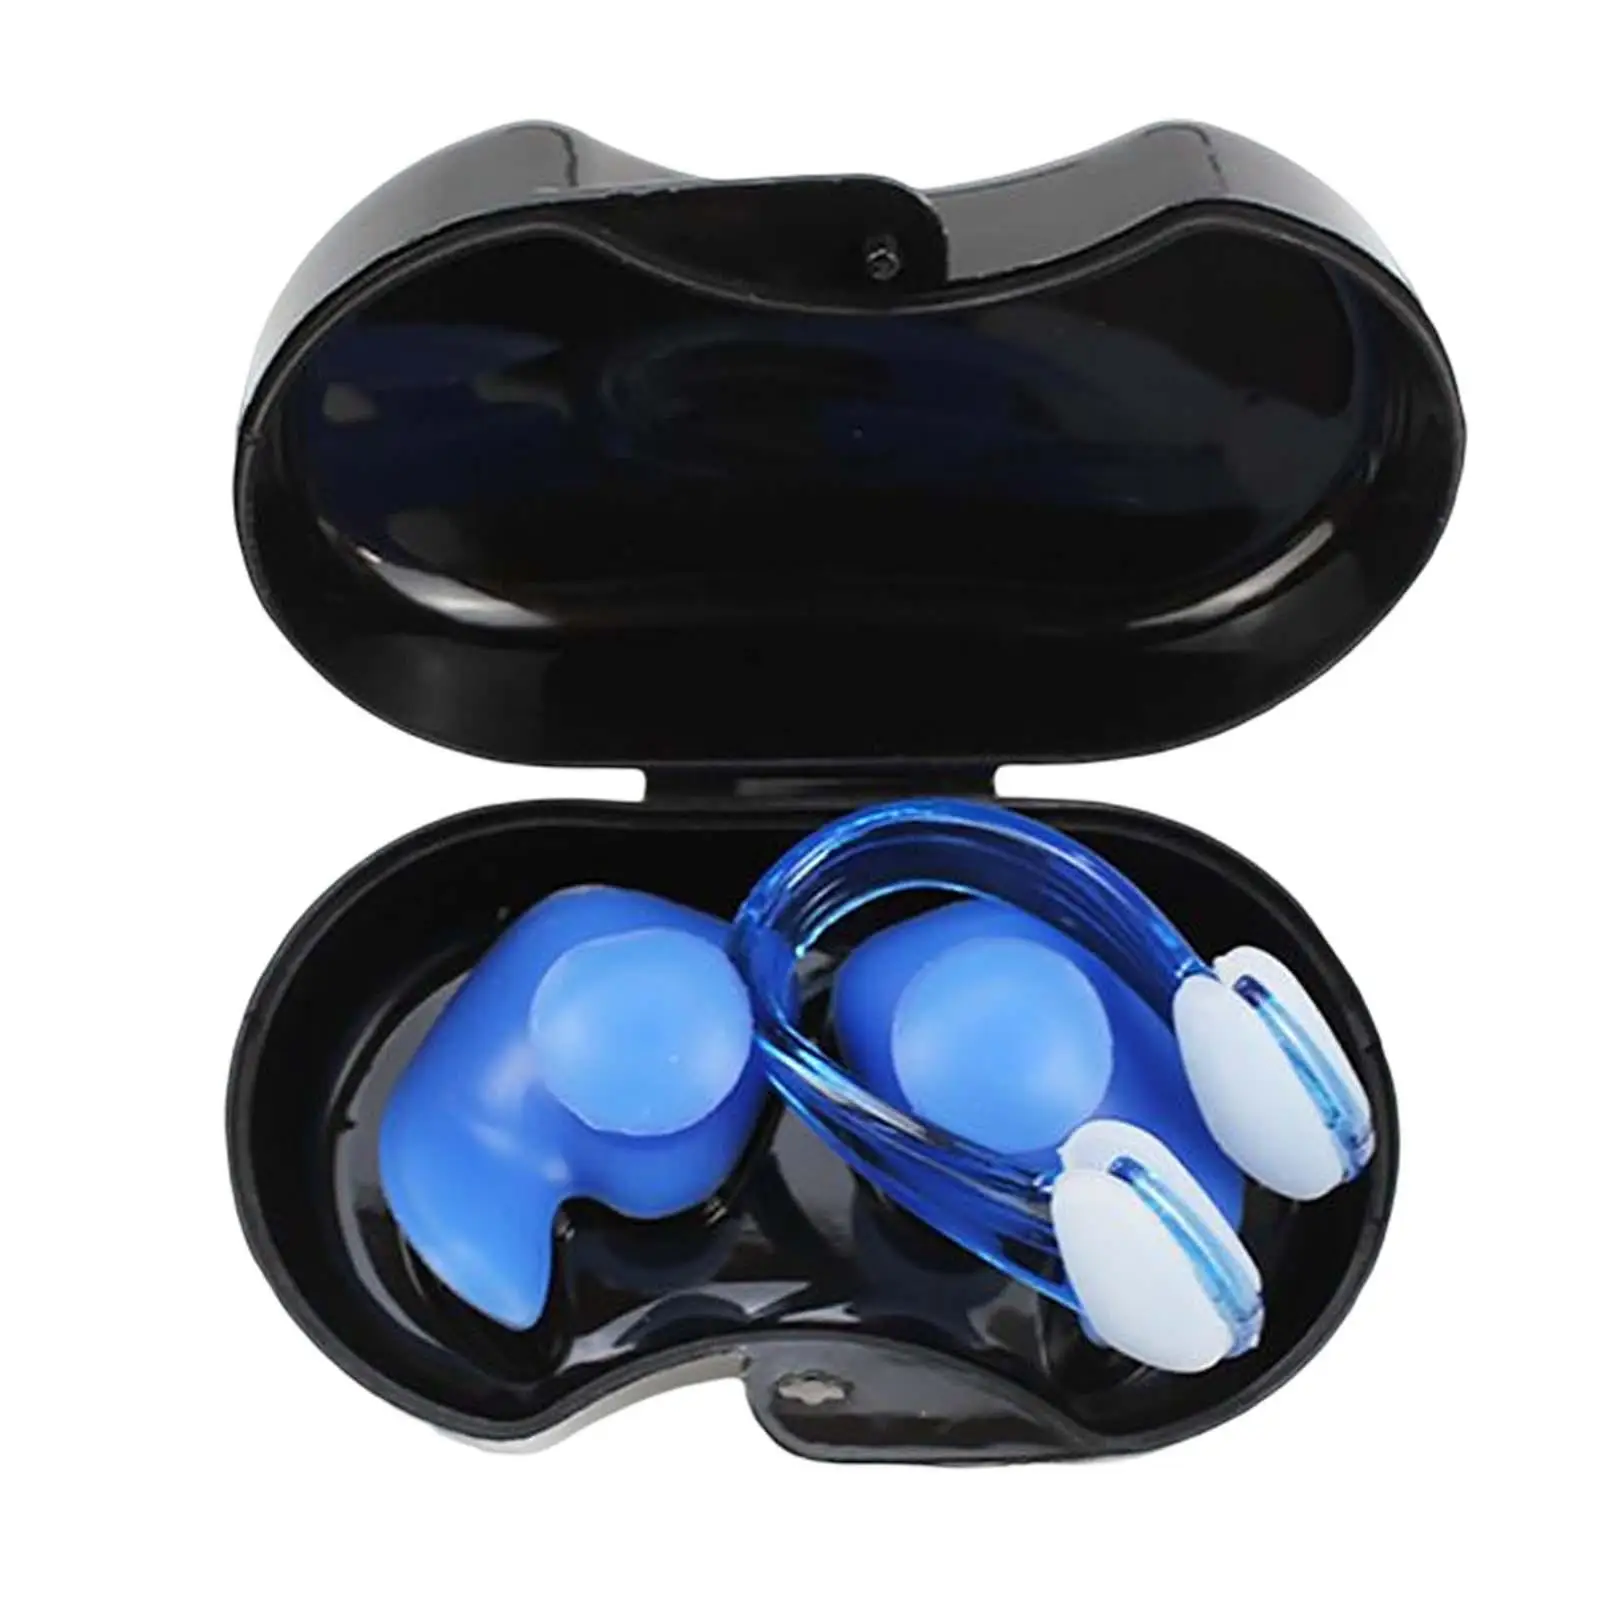 Swimming Ear Plug Nose Clip Set Silicone Earplugs Waterproof Ear Nose Protector with Storage Box for Water Sports Men Women Kids